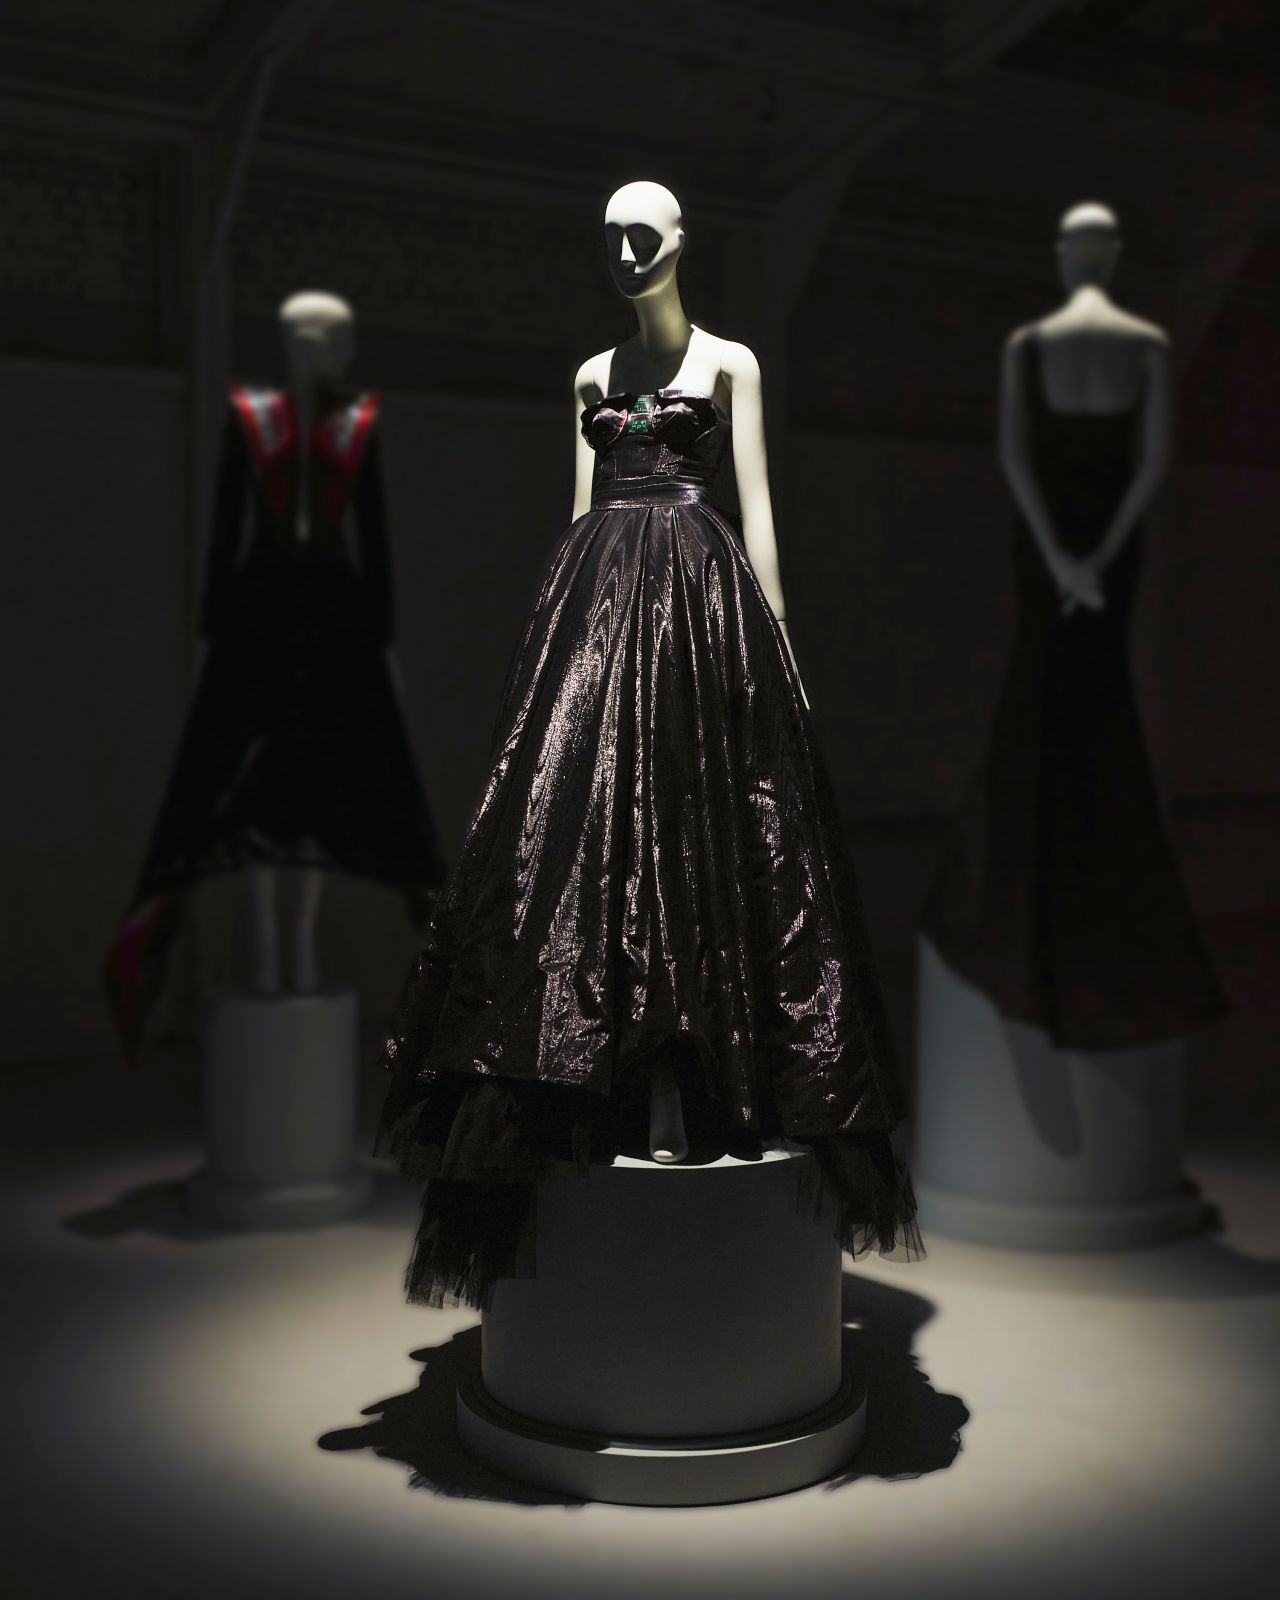 Scott said he wanted the gowns to be "sculptural, inspiring and striking."